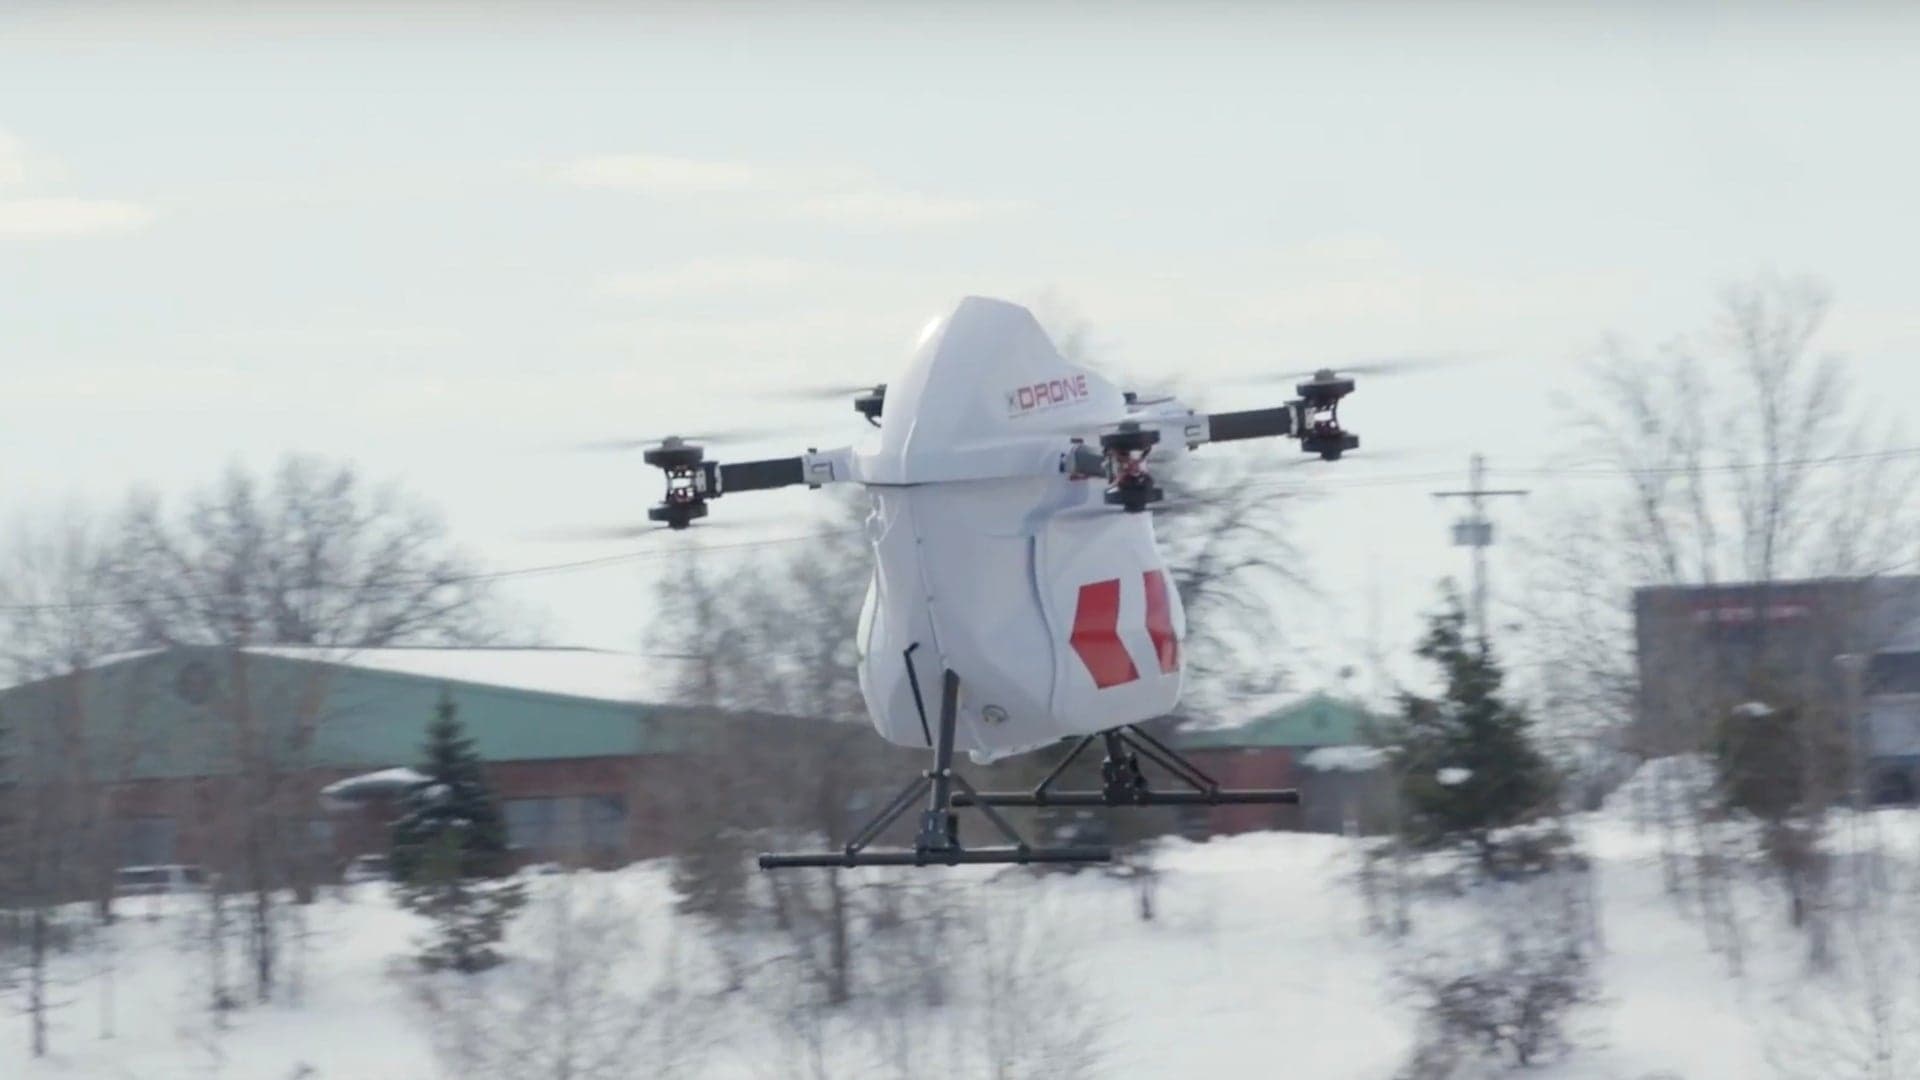 Drone Delivery Canada Completed Its First Successful Test Flight